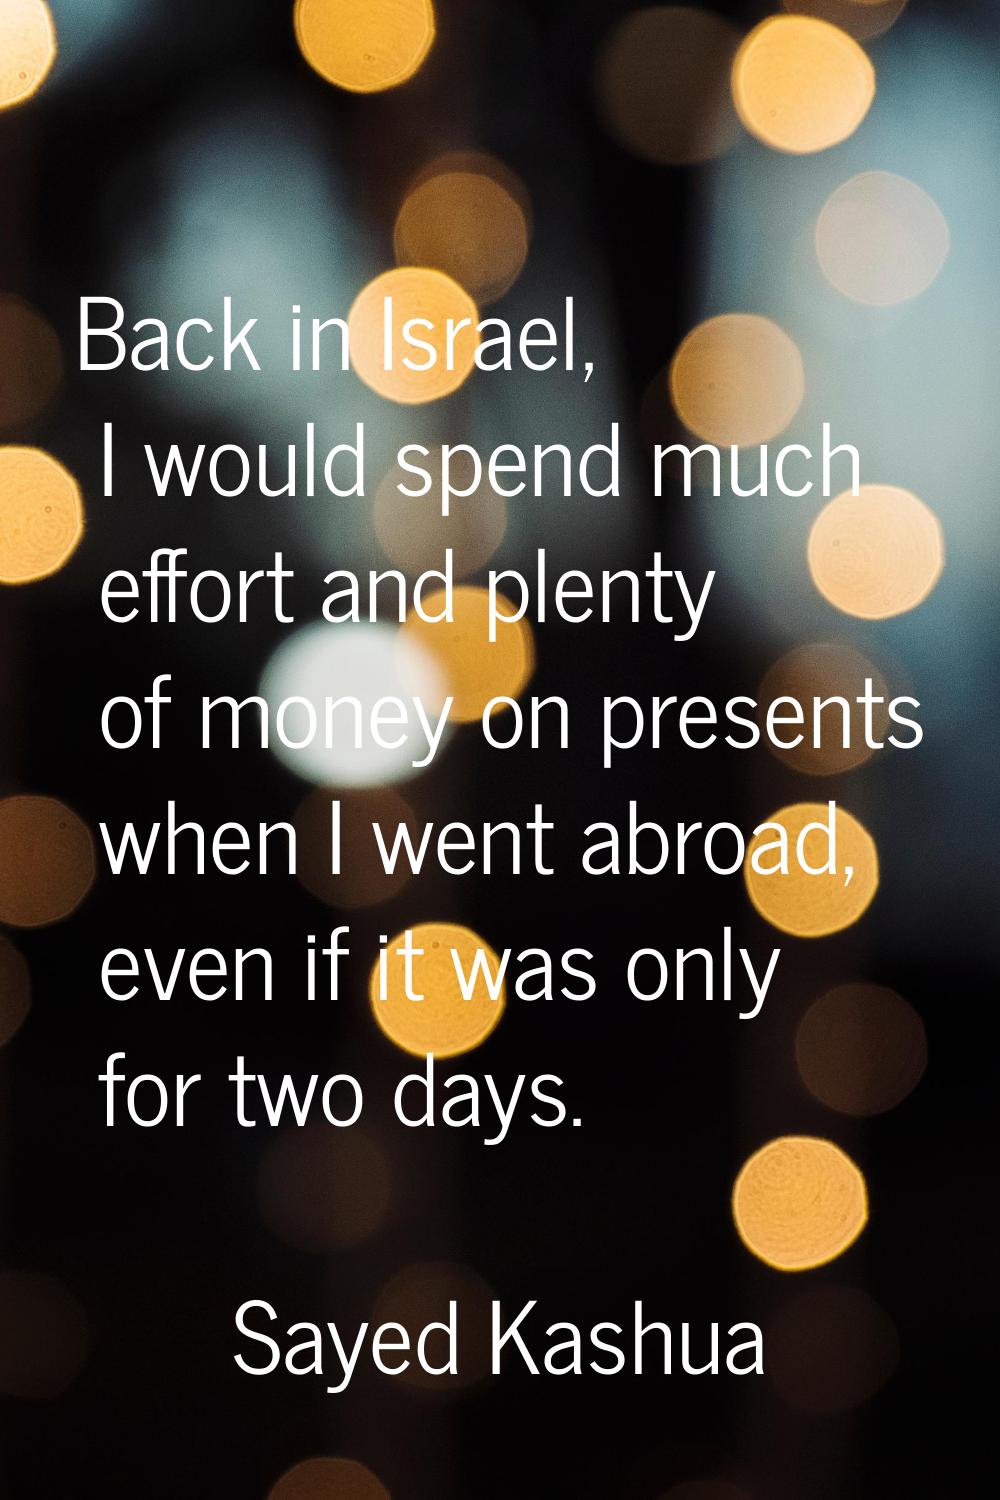 Back in Israel, I would spend much effort and plenty of money on presents when I went abroad, even 